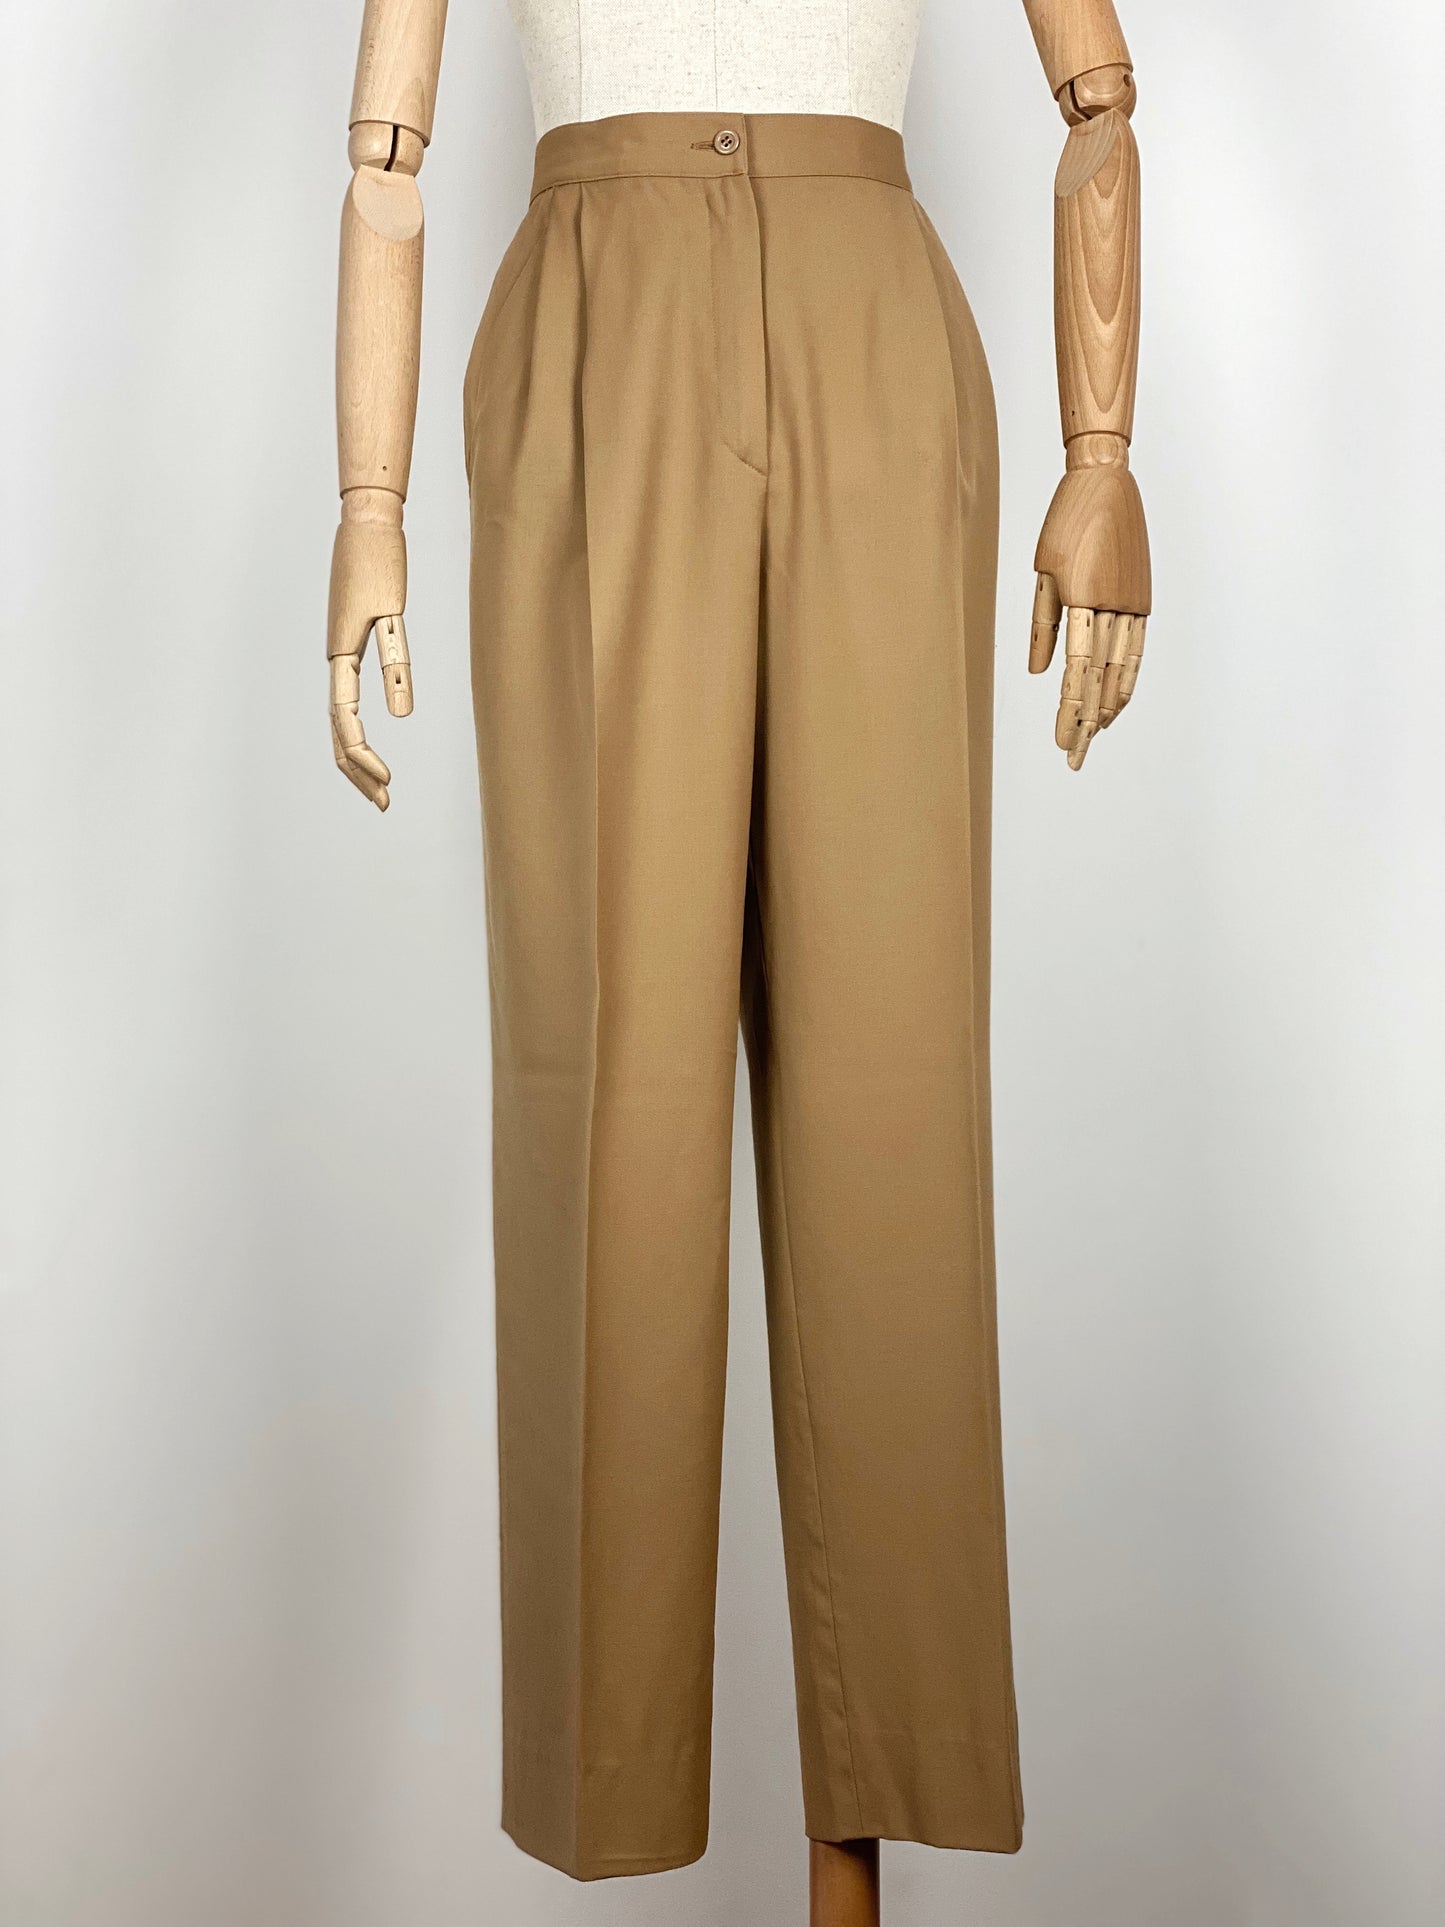 Vintage Beige Trousers by Valentino